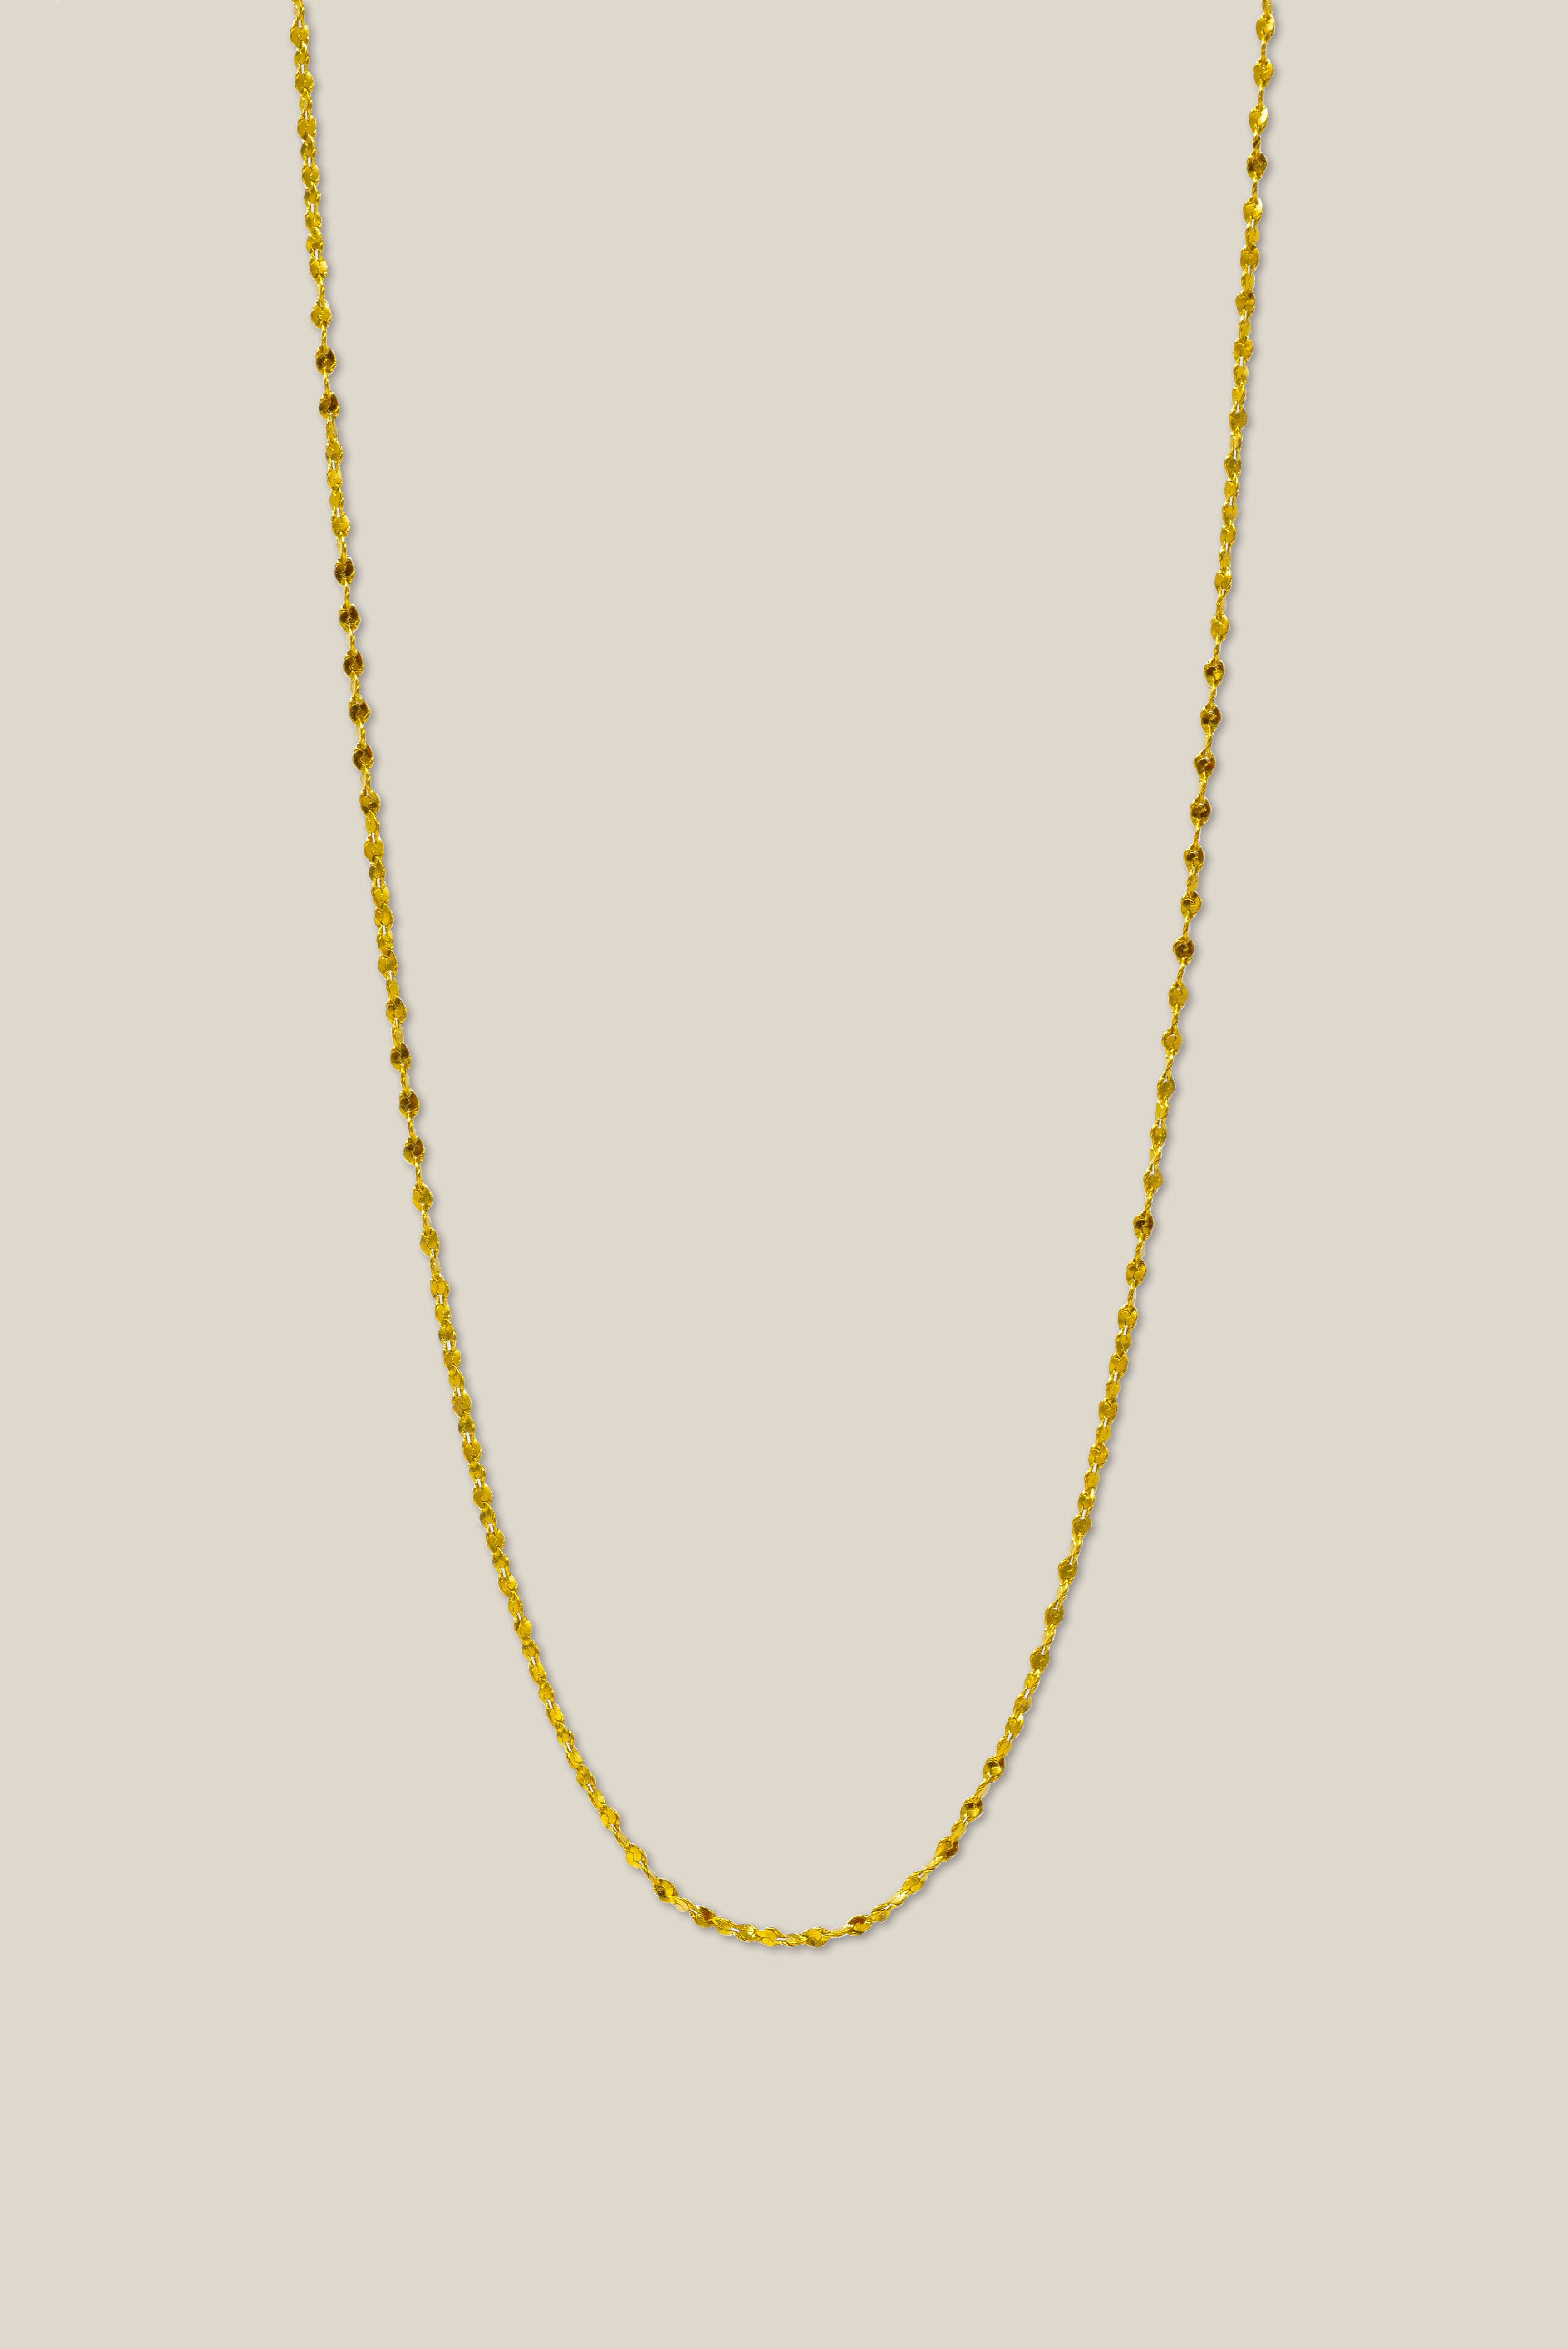 GILTY GOLD (NECKLACE)